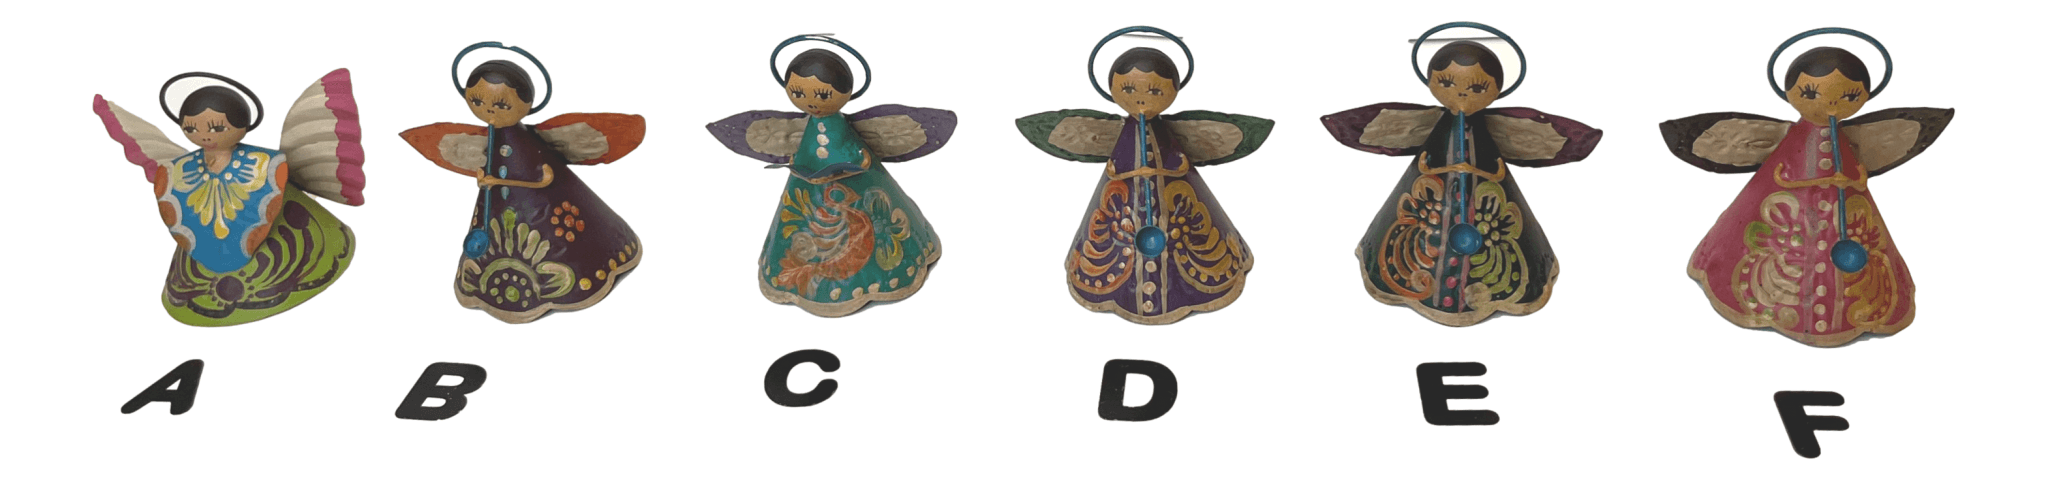 Angel Musicians Tin Painted Various Desings Handcrafted In Mexico H: 3.5 inches X D: 2.5 inches - Ysleta Mission Gift Shop- VOTED 2022 El Paso's Best Gift Shop